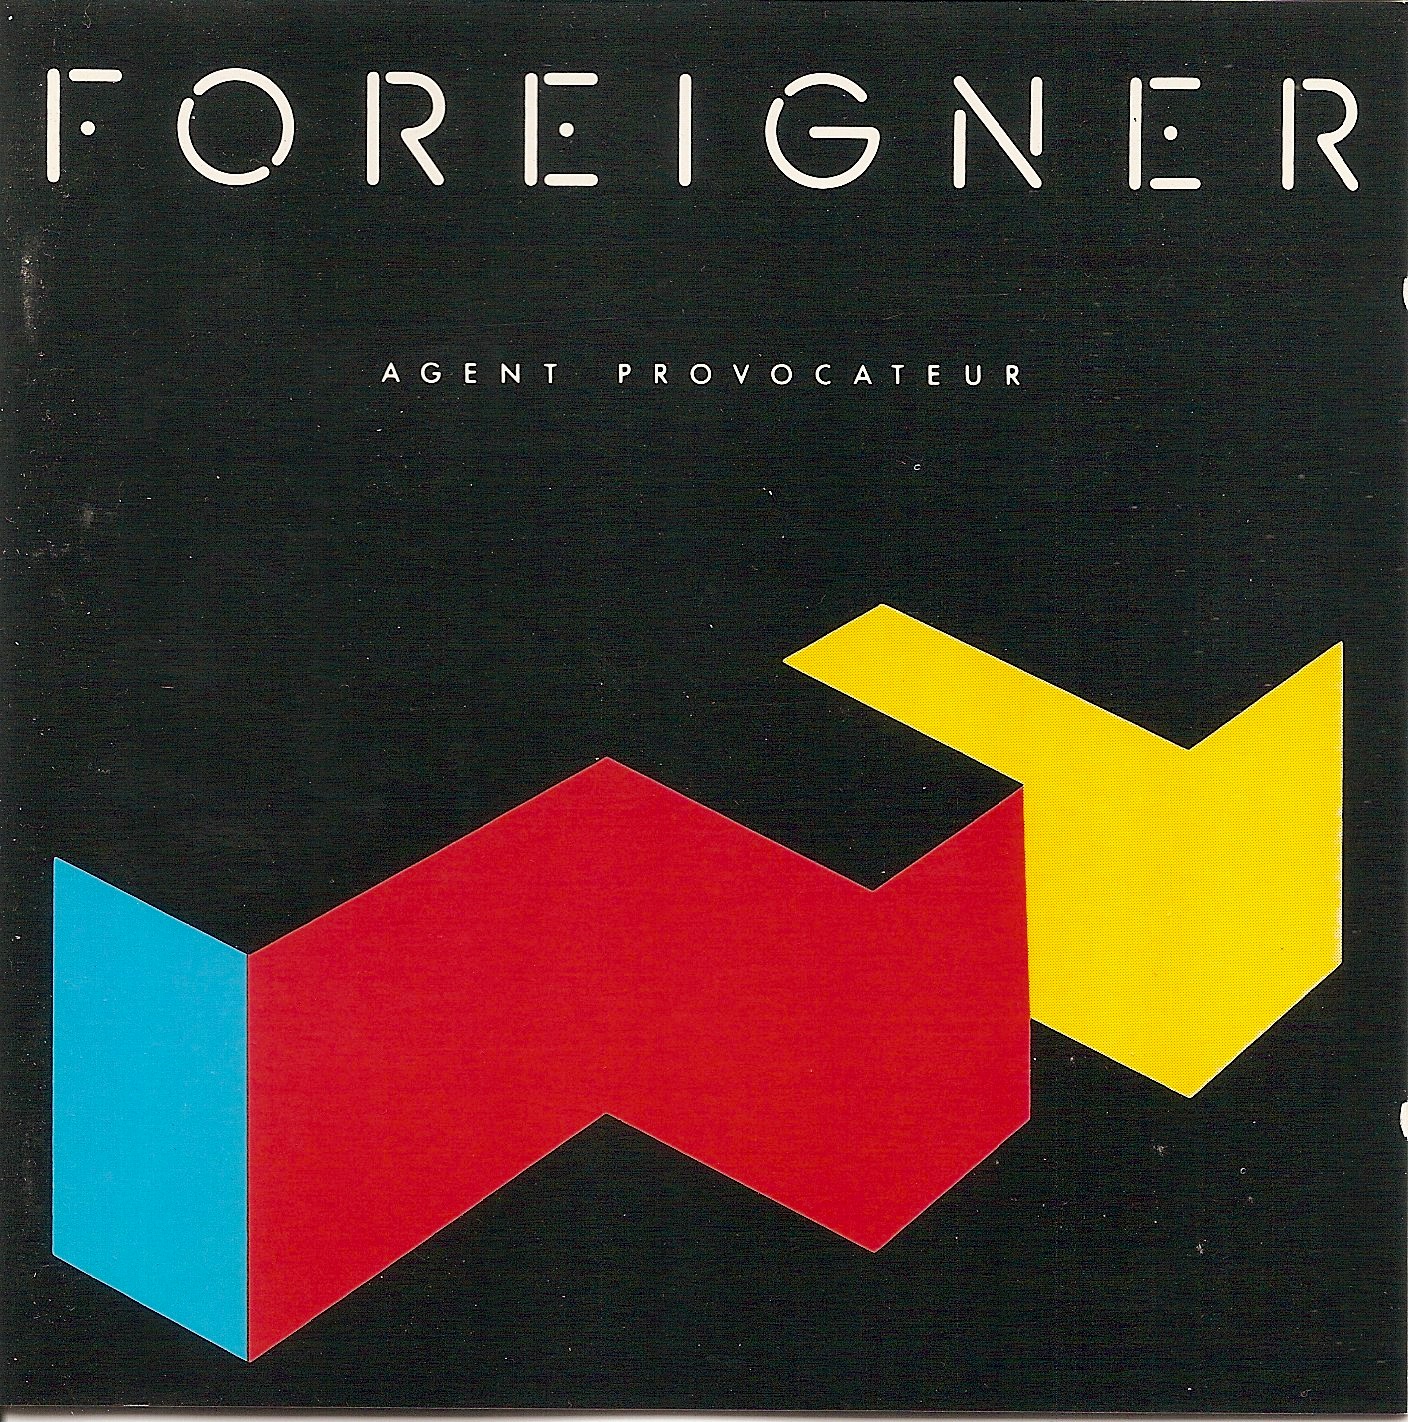 The Target CD Collection: Foreigner